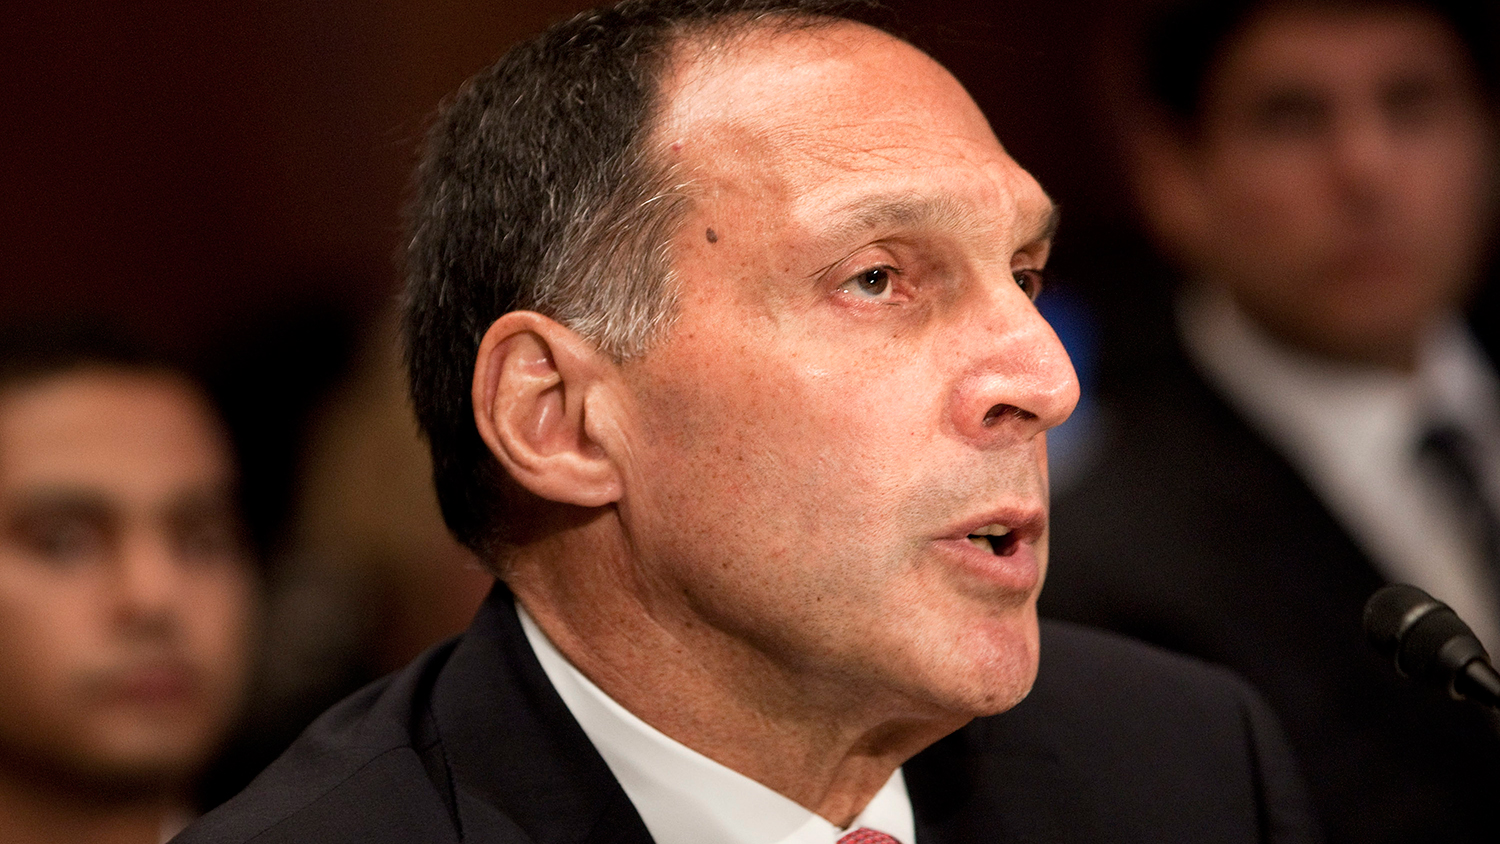 Former Lehman CEO Dick Fuld Calls for New Political Leadership